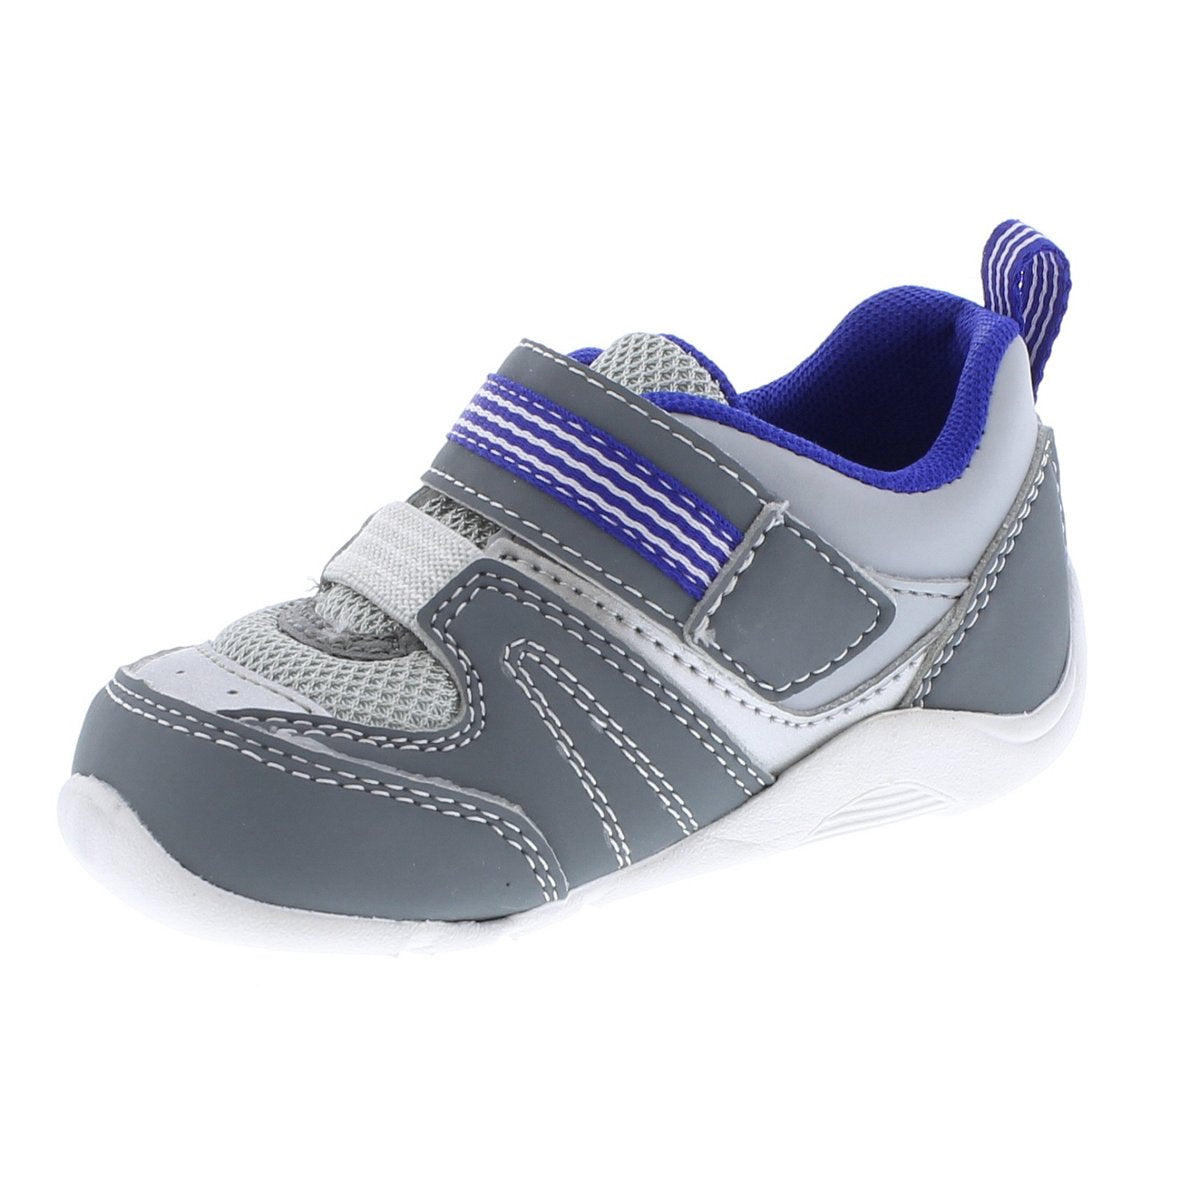 Baby Tsukihoshi Neko Sneaker in Gray/Royal from the front view